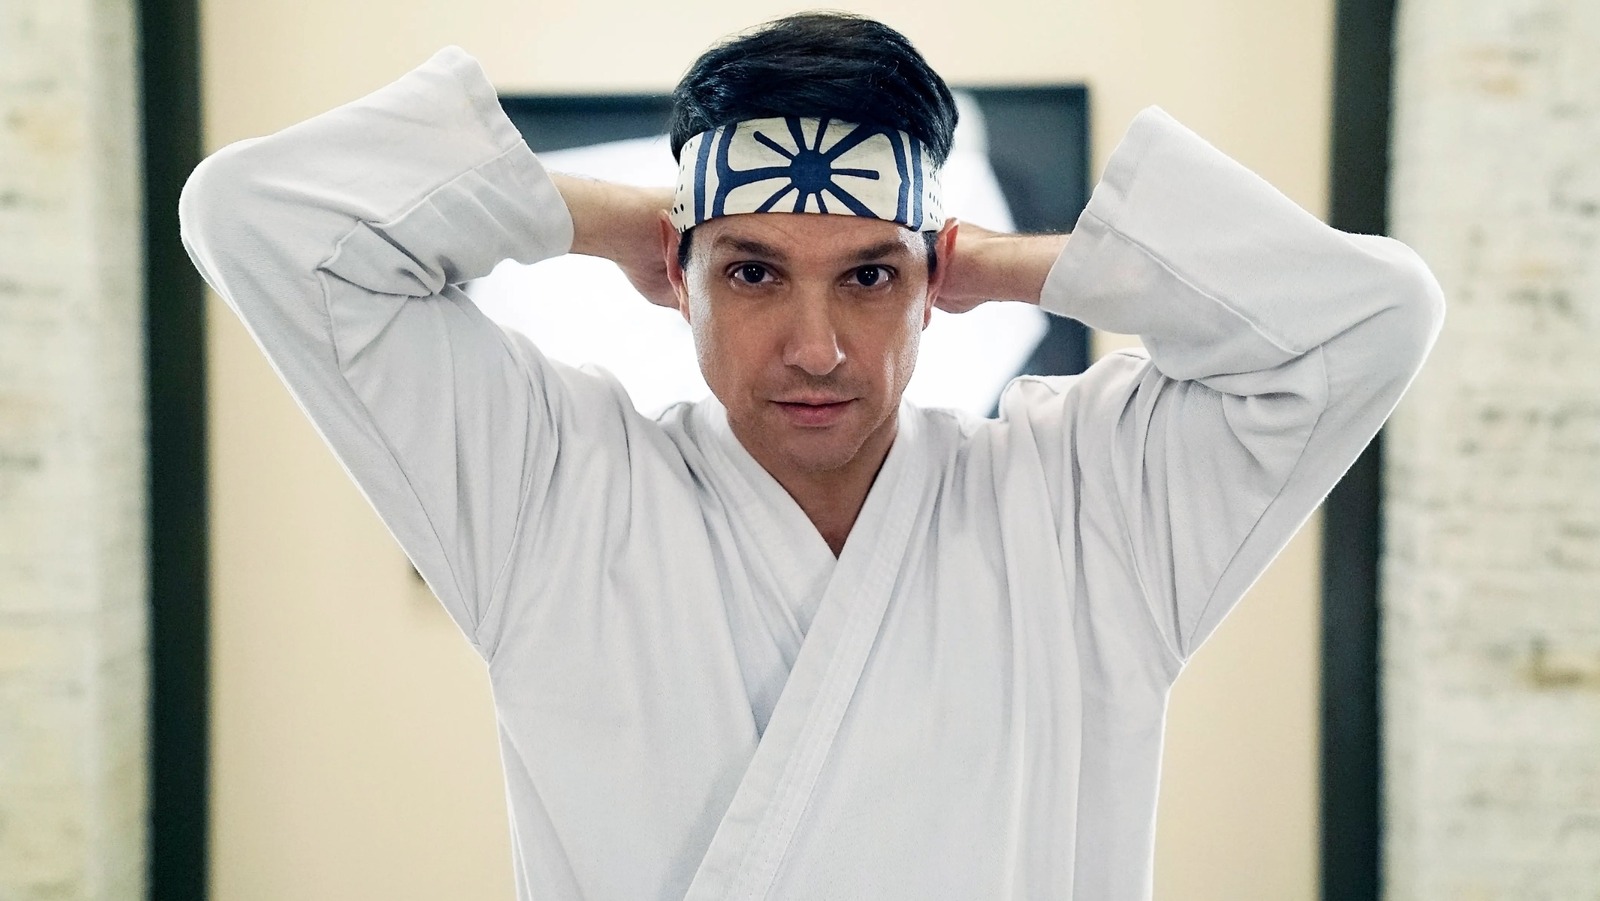 Ralph Macchio and Jackie Chan Starring in New 'Karate Kid' Movie